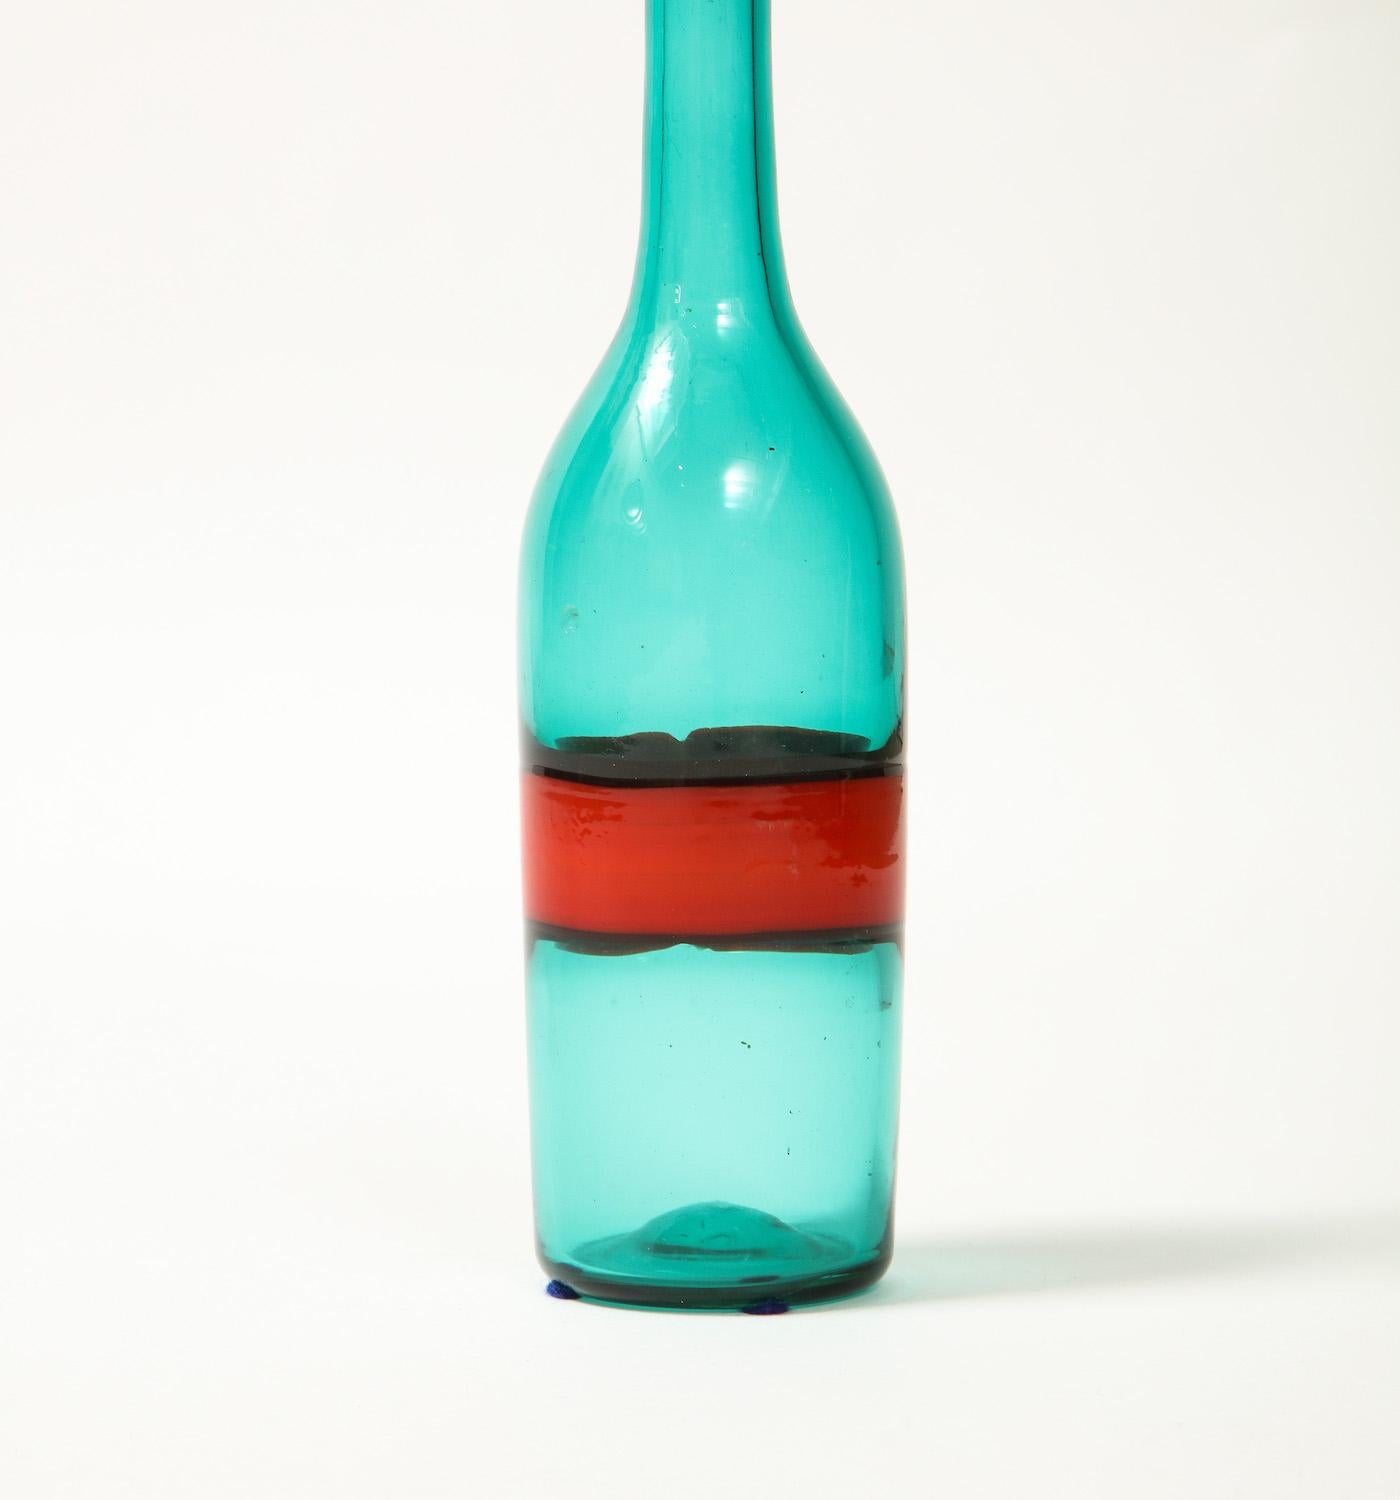 Hand blown incalmo glass decanter in red and green with stopper. Unsigned. Bottle top appears to have been neatly ground down at some point. Provenance: Private collection, Berkeley, CA.